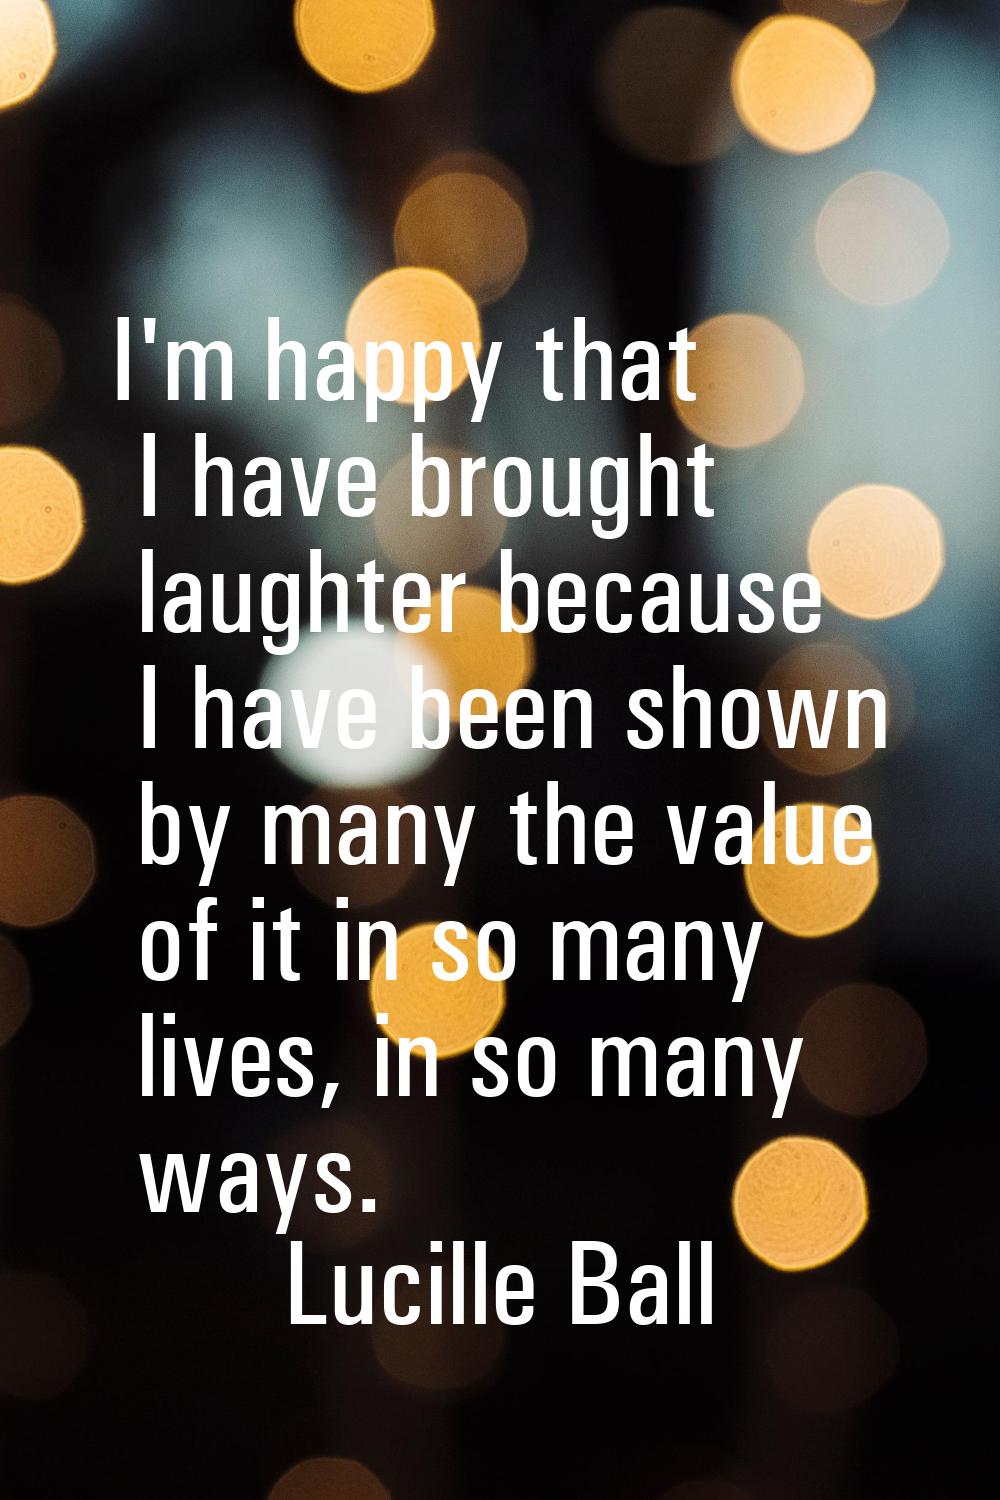 I'm happy that I have brought laughter because I have been shown by many the value of it in so many